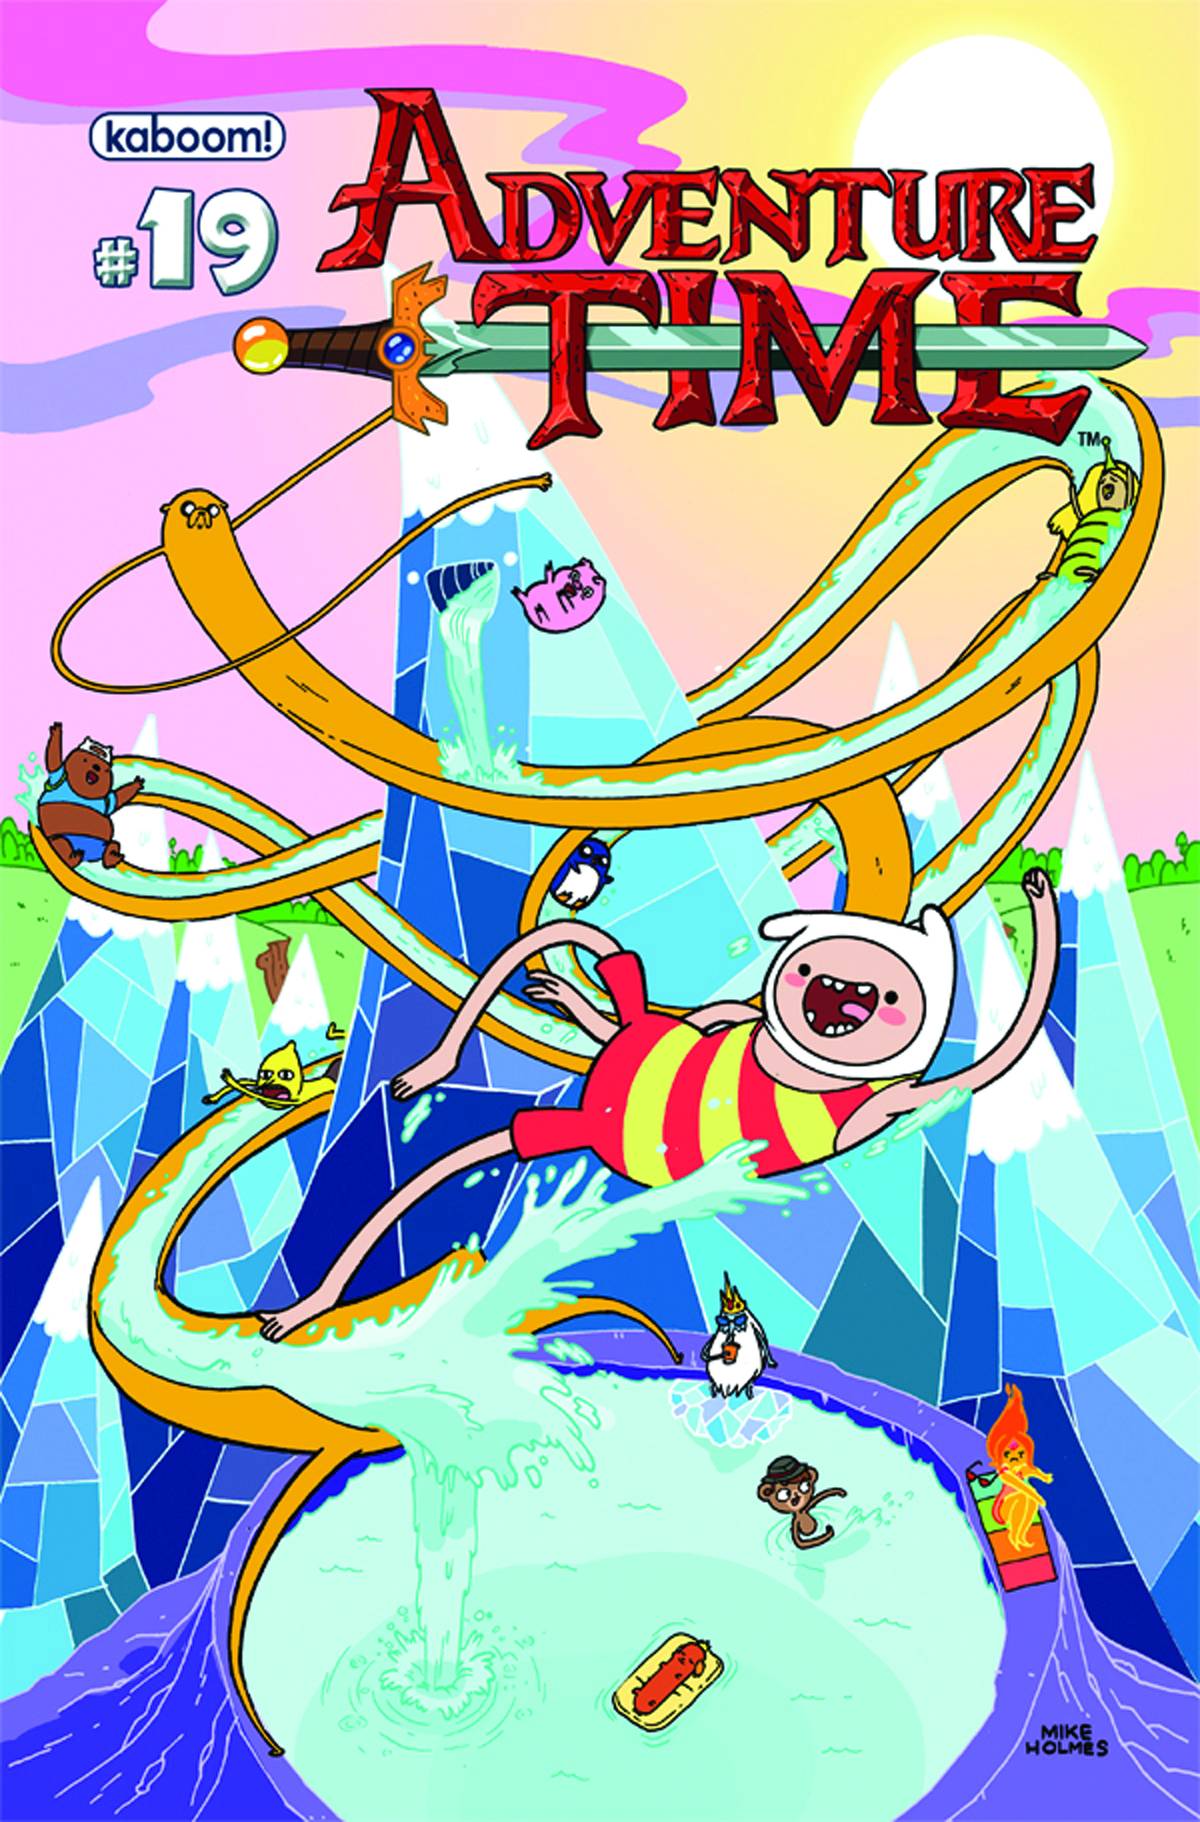 Adventure Time #19 Main Covers